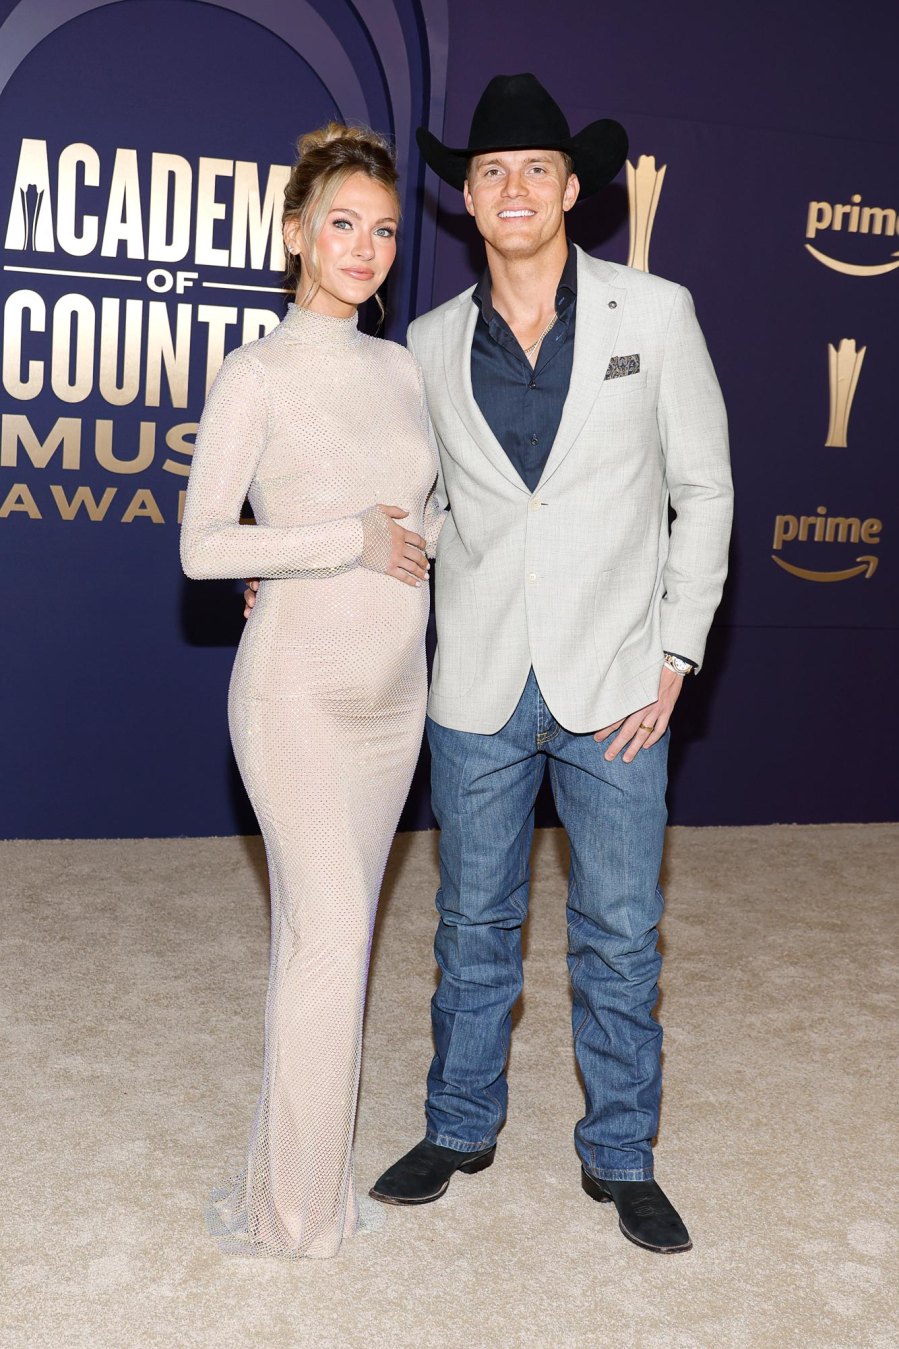 Parker McCollum and wife at the ACM Awards